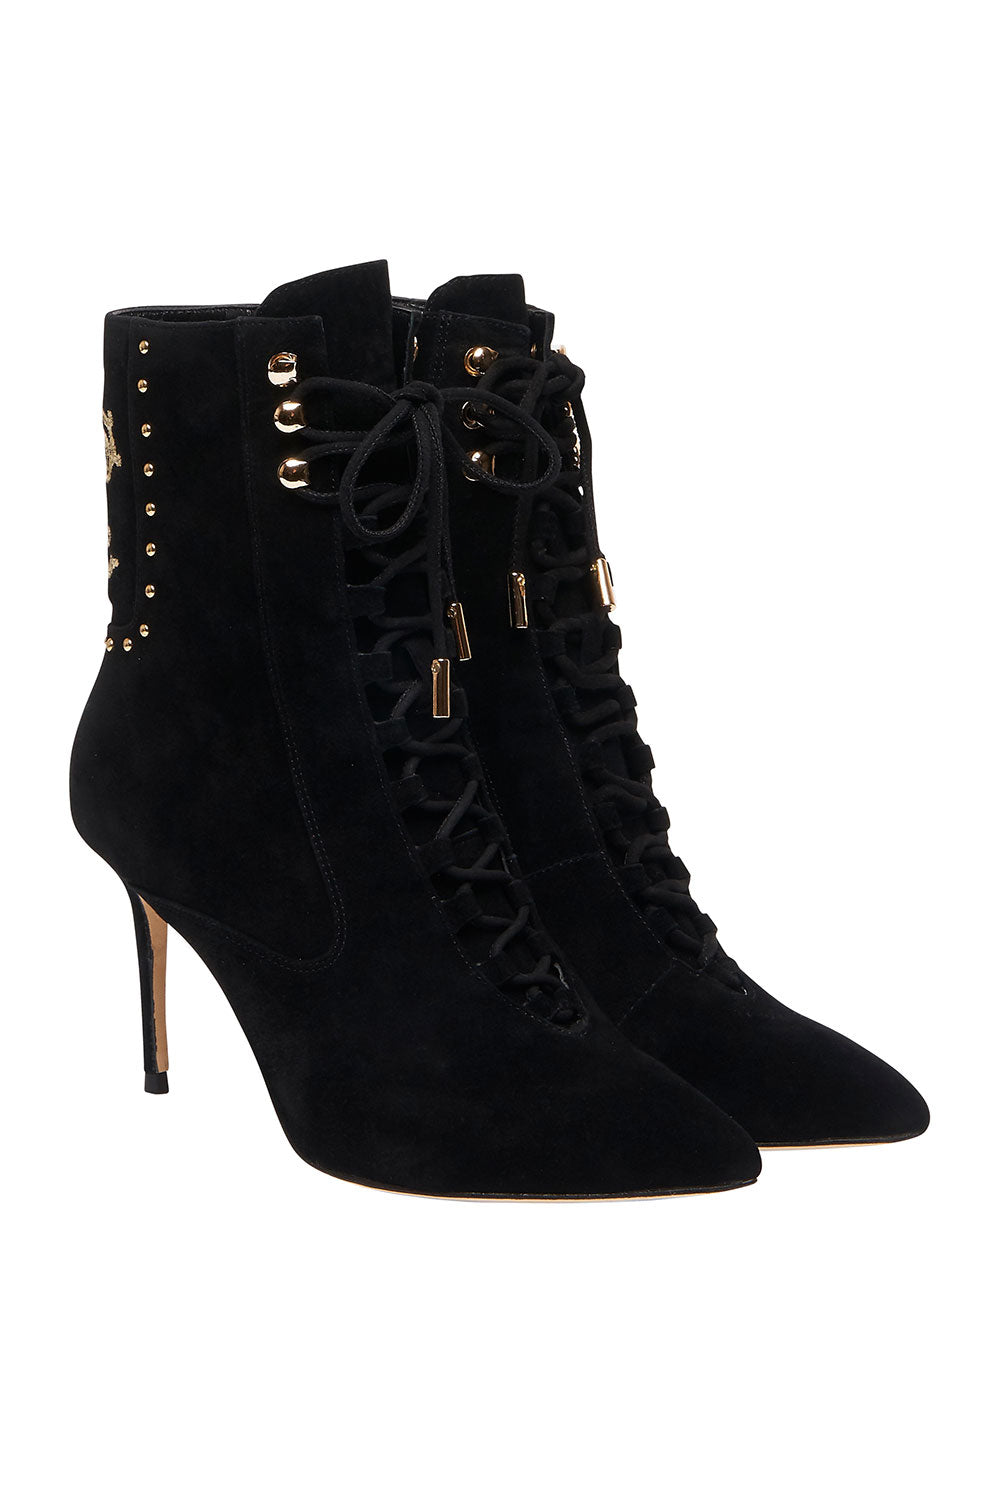 LACED BOOT BLACK CONTEMPORARY